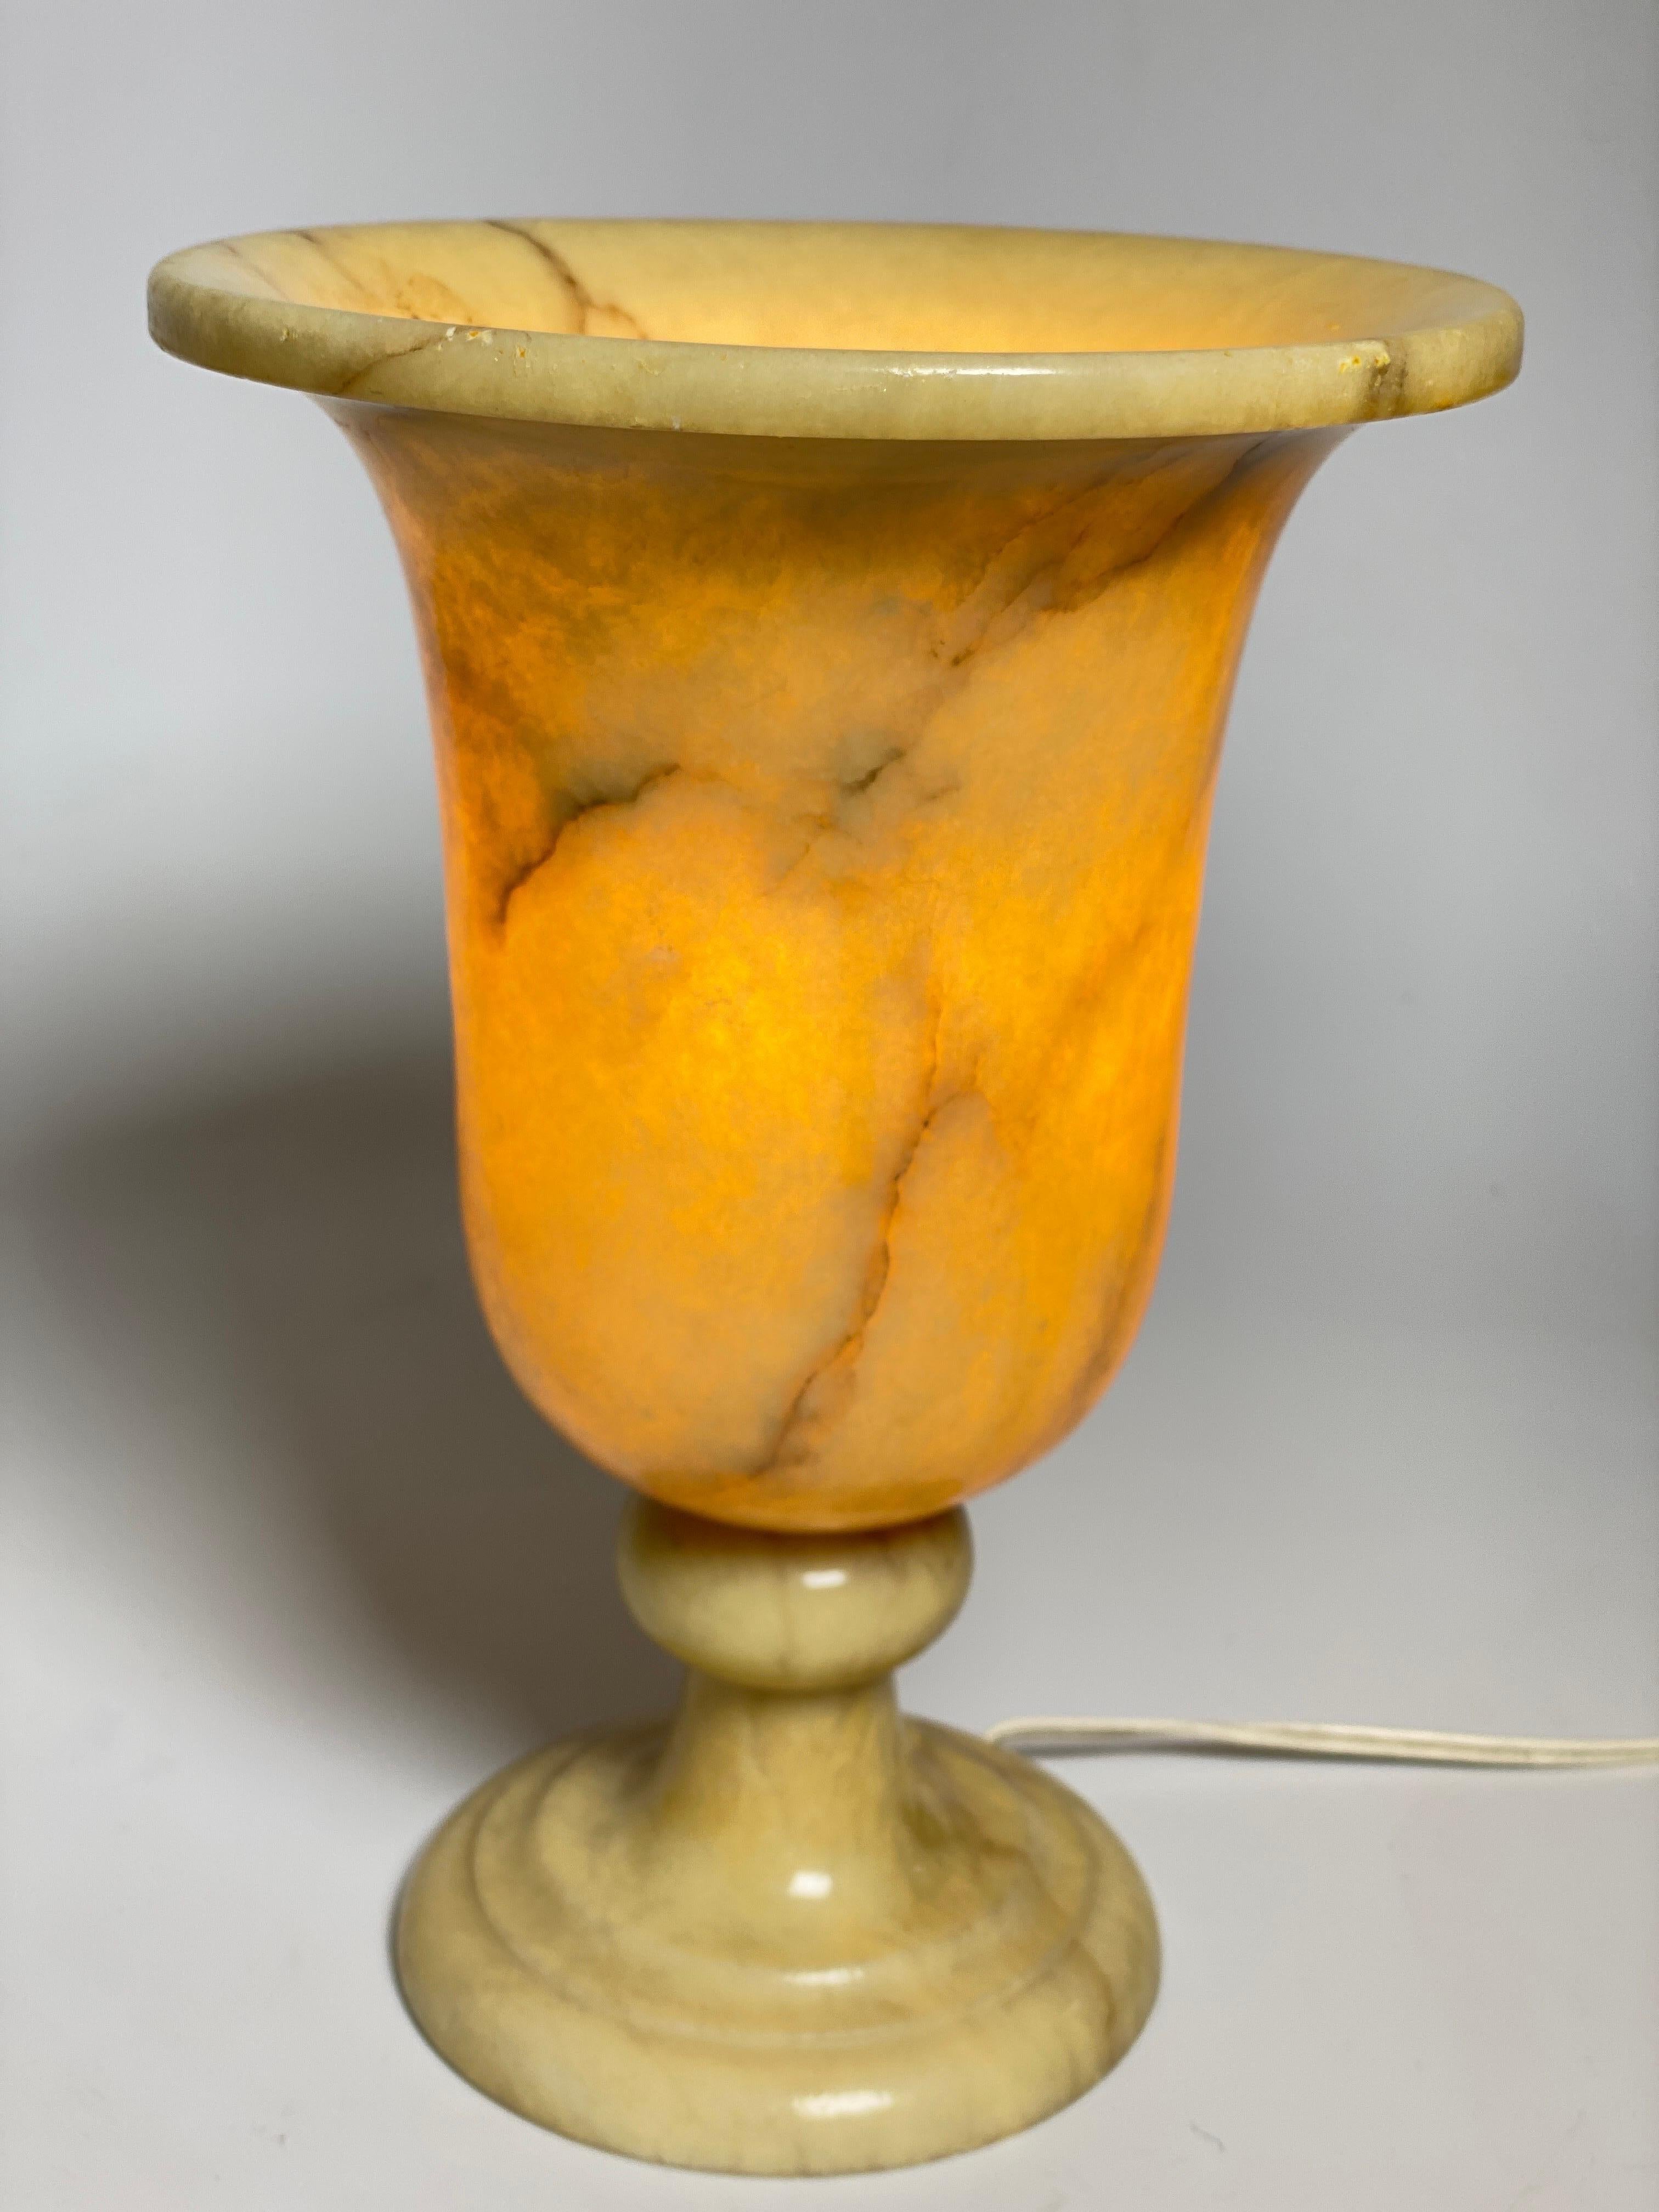 Art Deco Alabaster Urn Uplighter Lamp, White and Yelow Color, France, circa 1940 For Sale 4